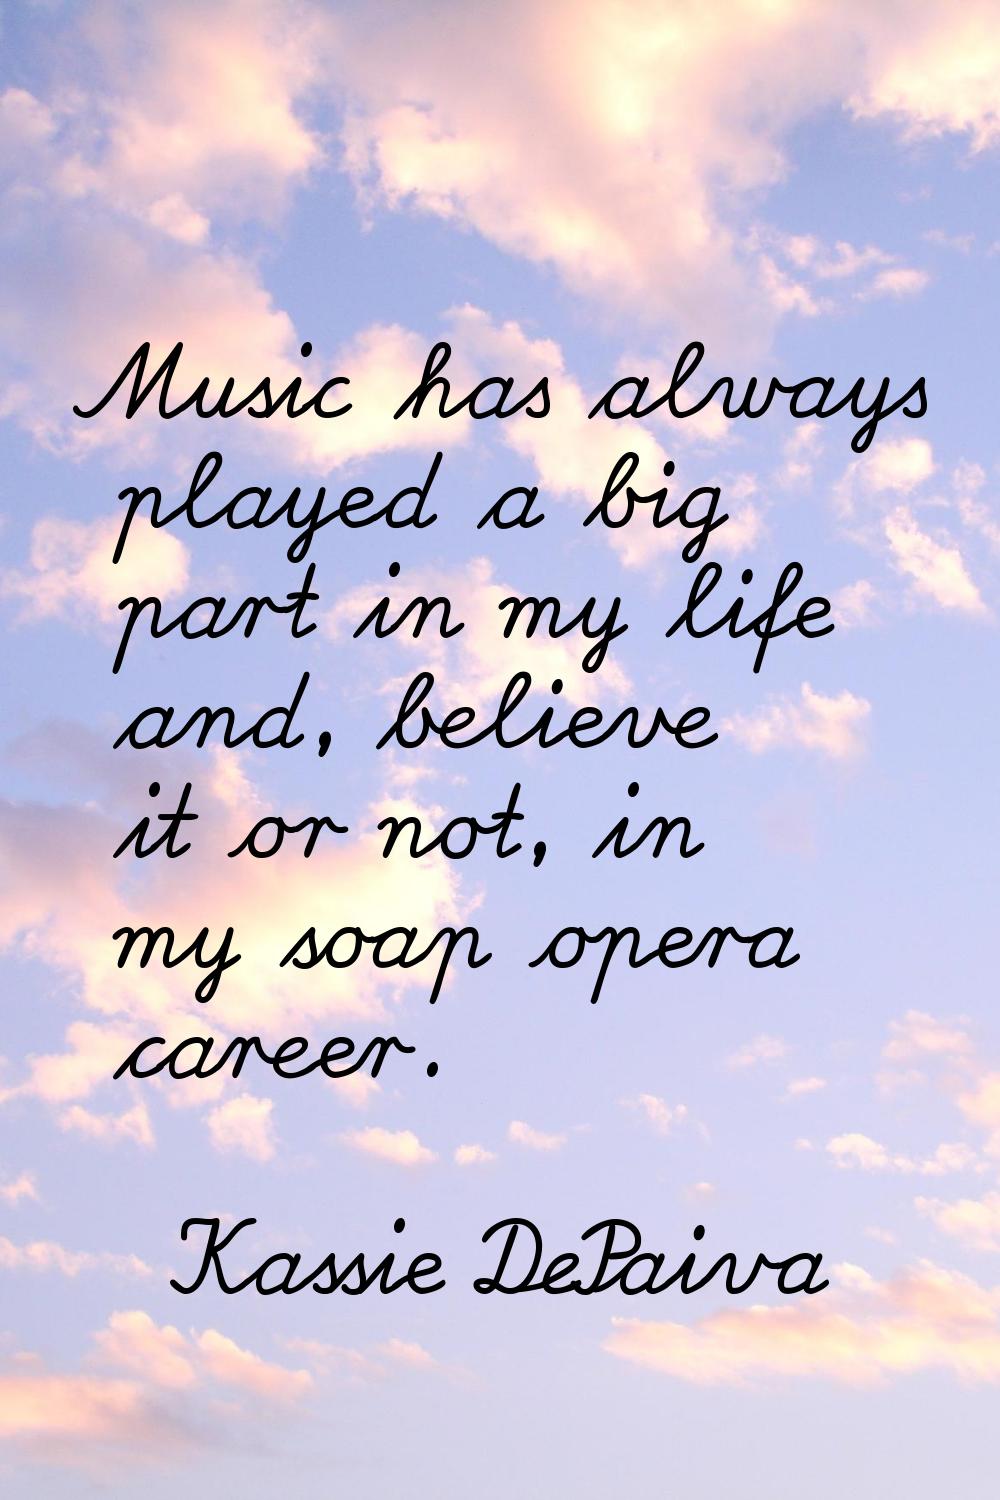 Music has always played a big part in my life and, believe it or not, in my soap opera career.